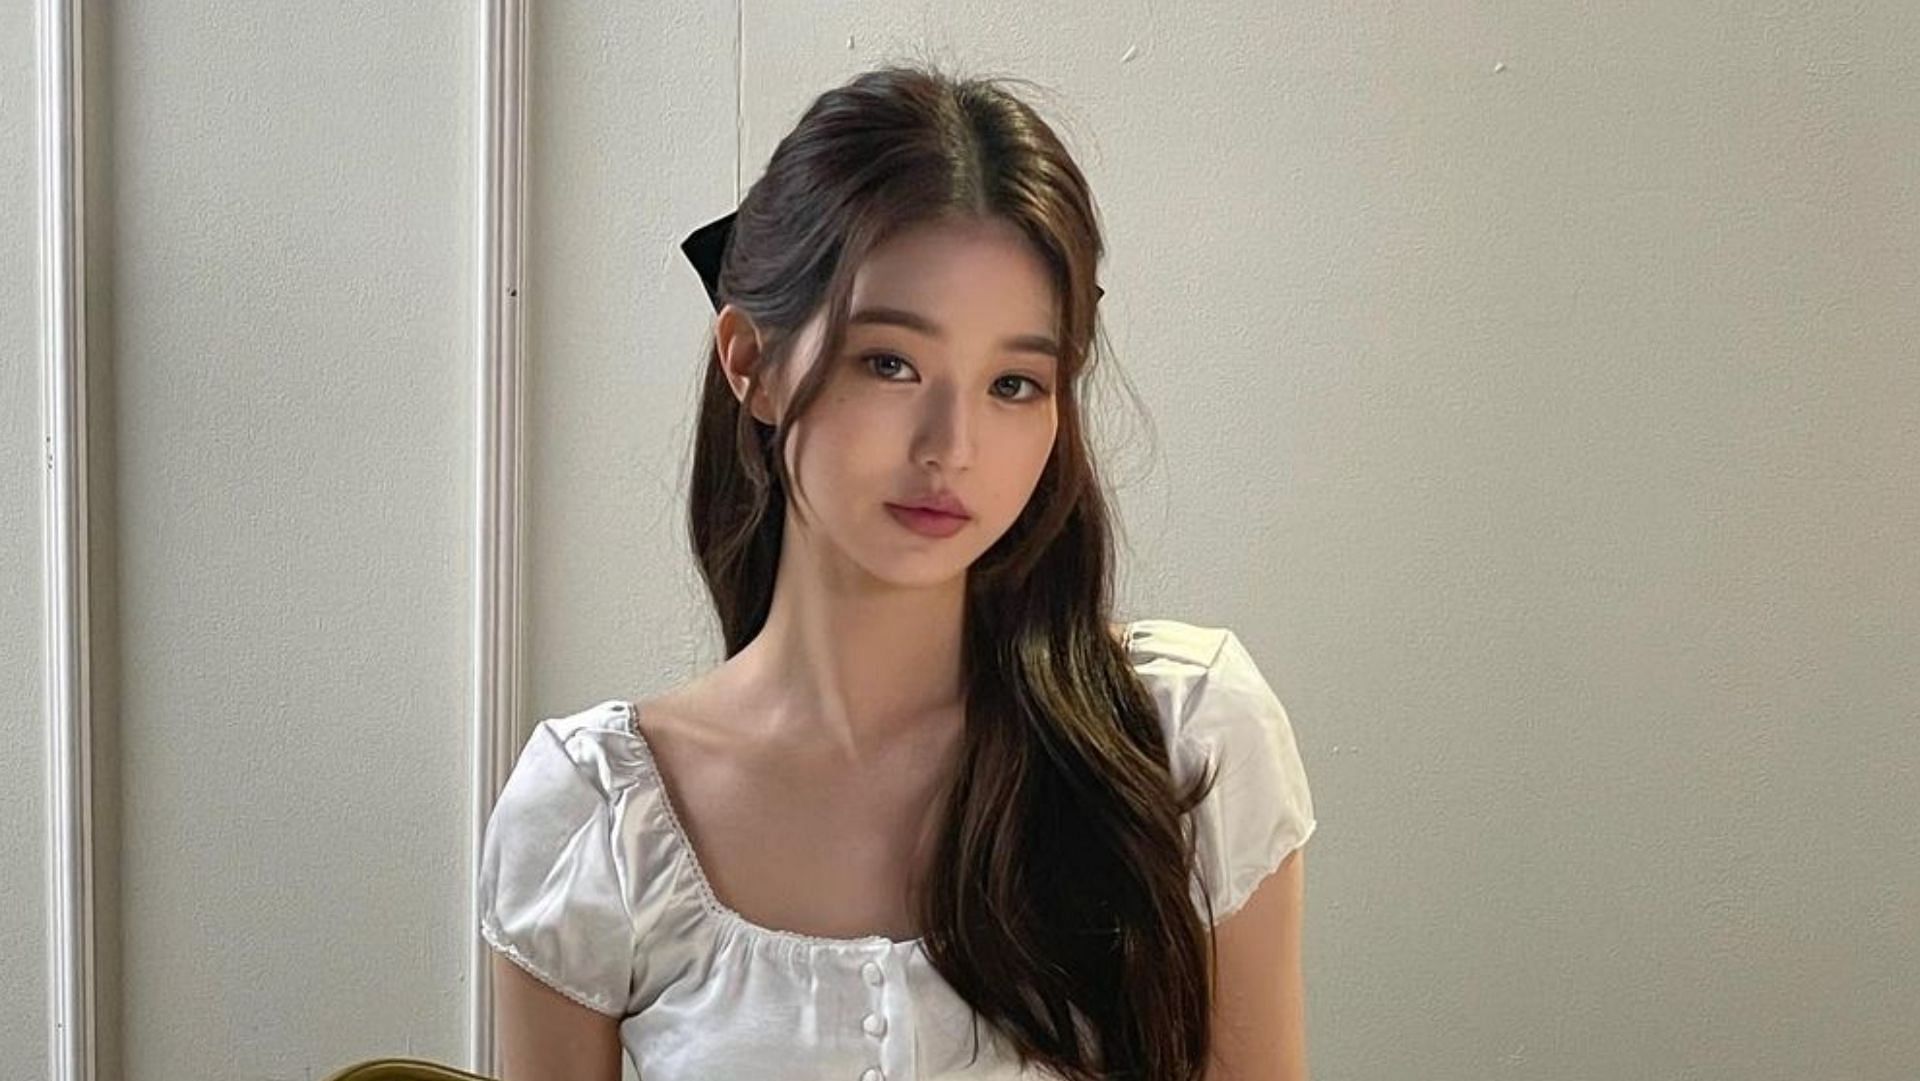 A still of the K-pop idol Jang Wonyoung. (Image via Instagram/@for_everyoung10)